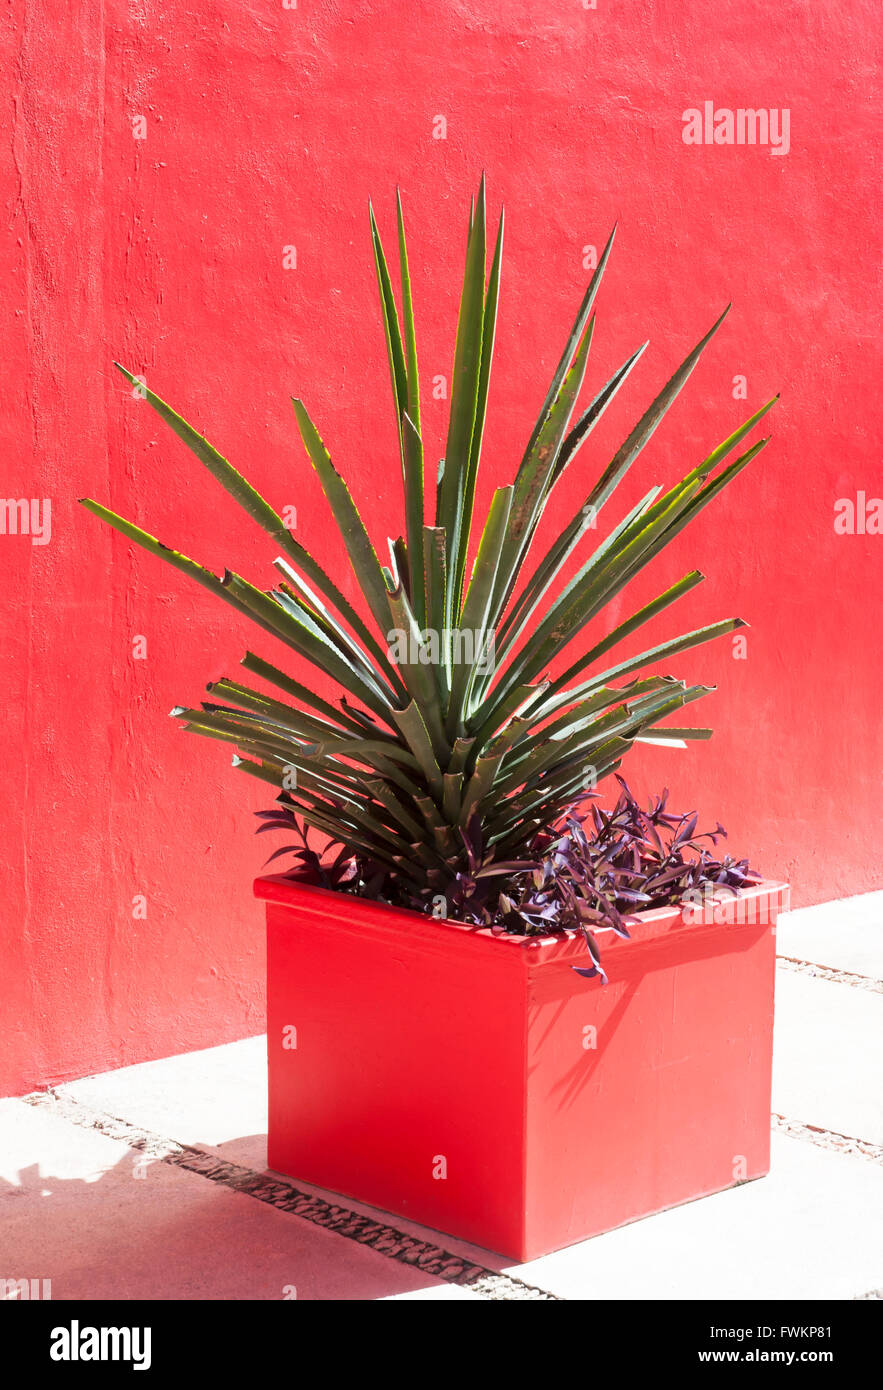 The plant with a bright red wall in a background (Costa Maya, Mexico). Stock Photo